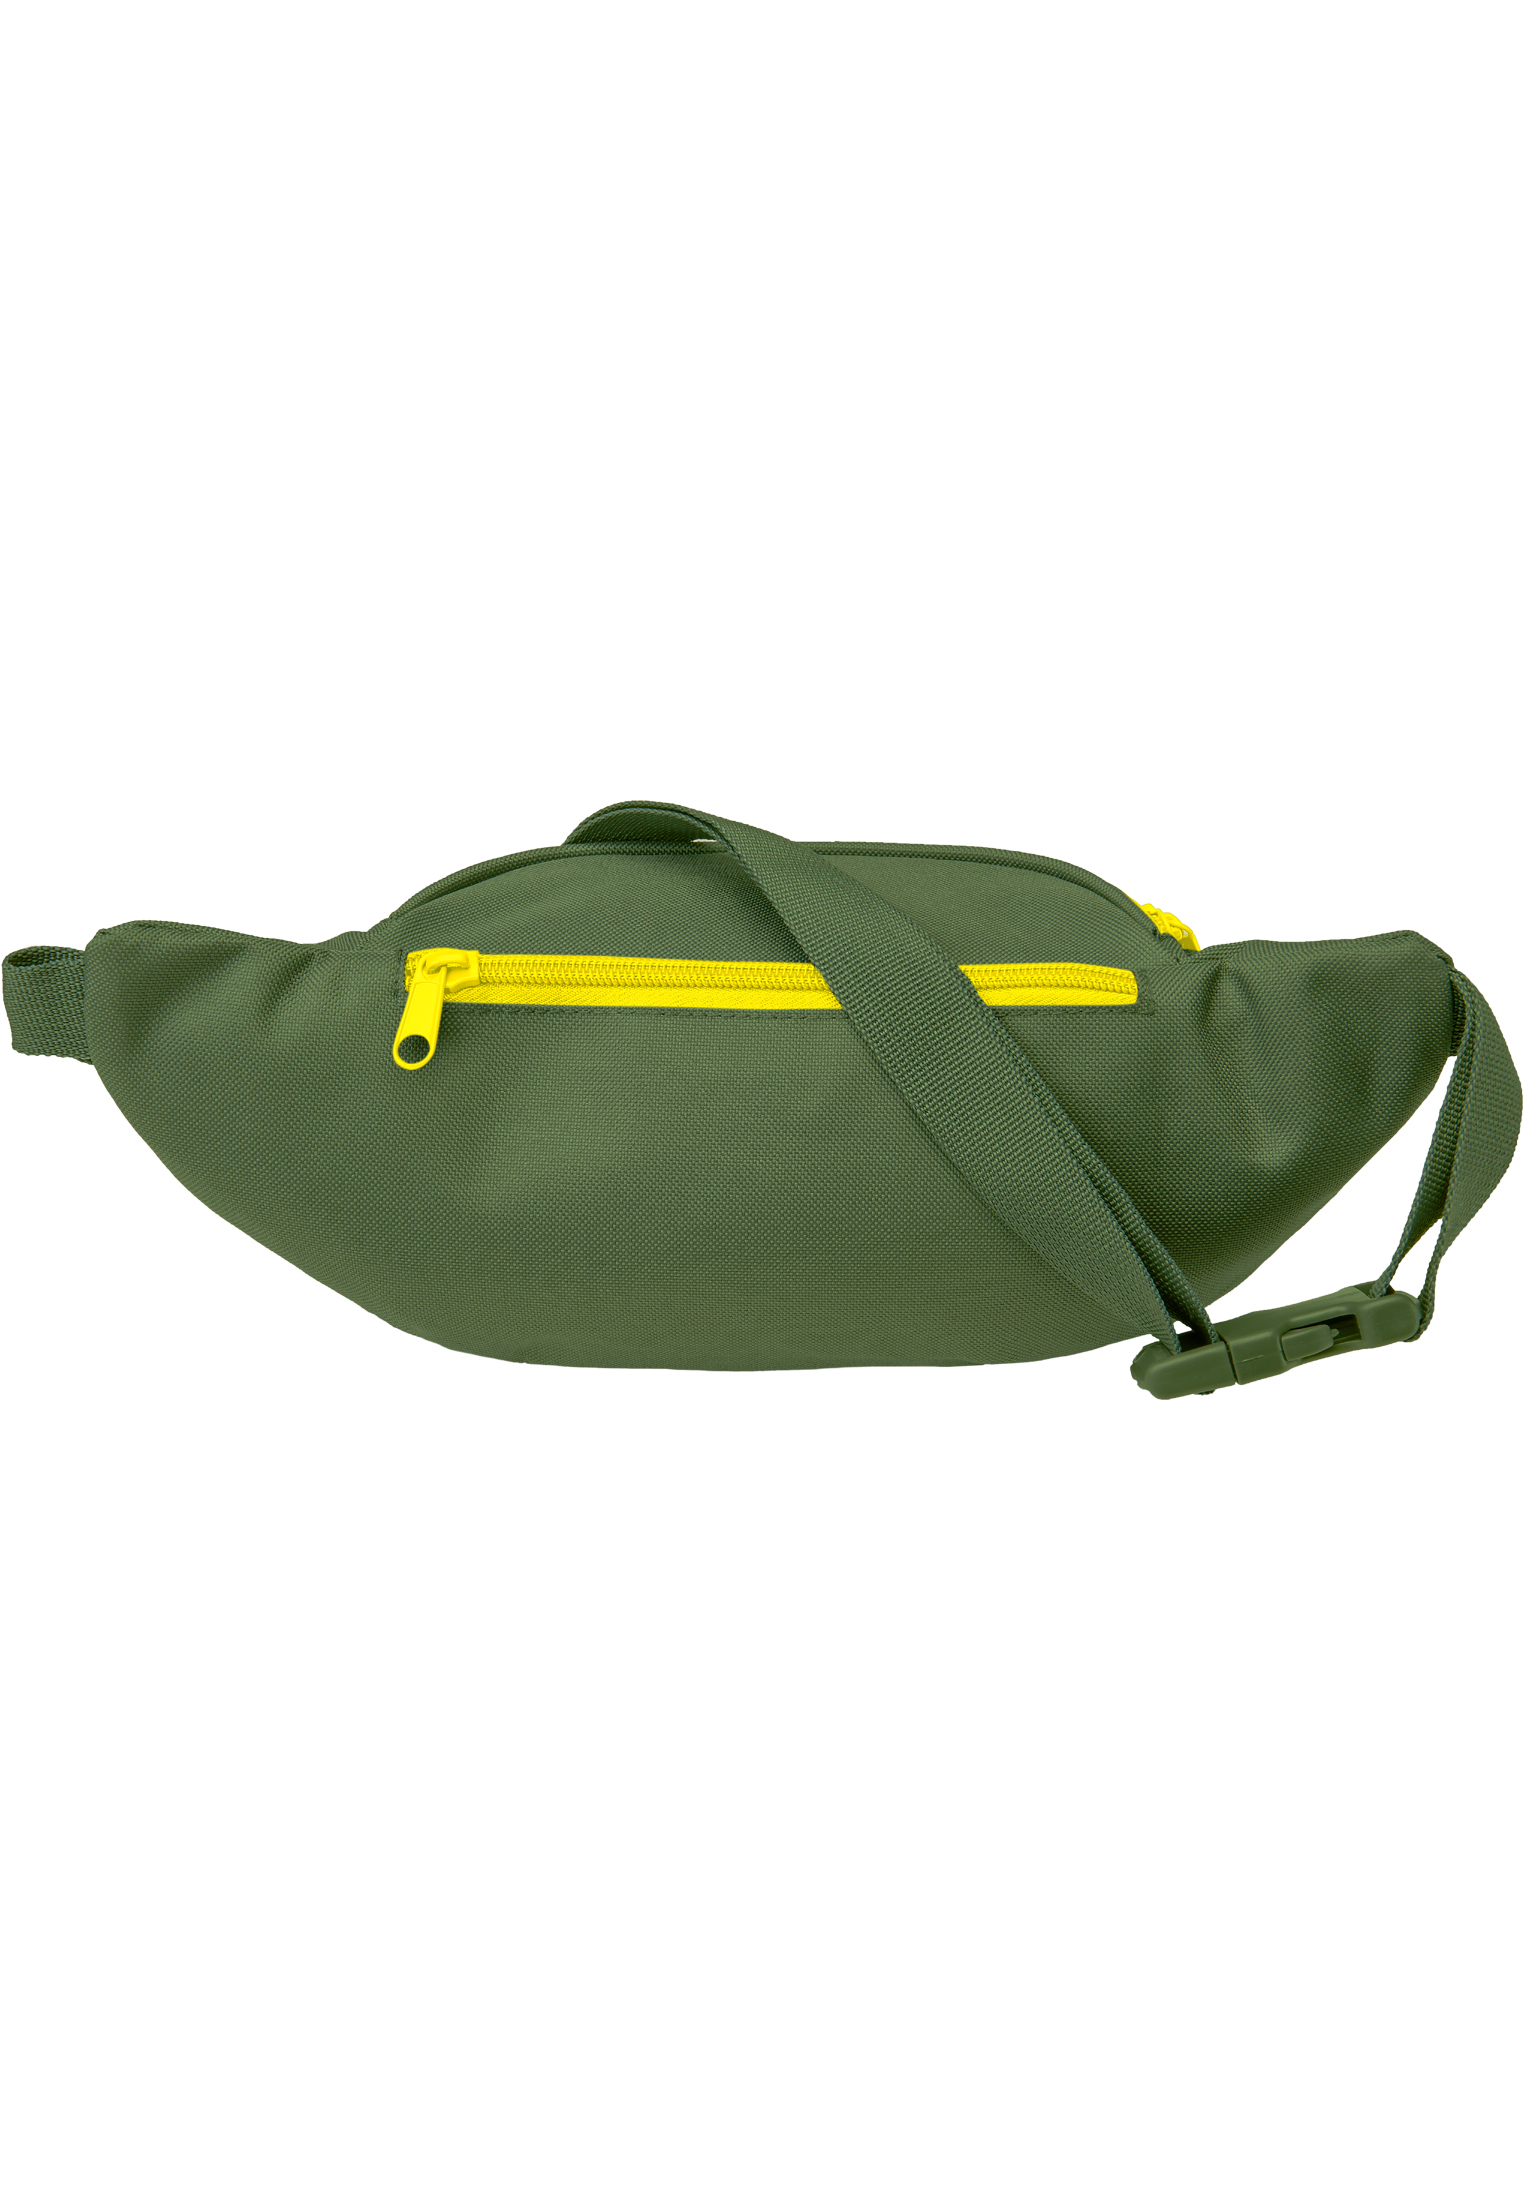 Taschen Pocket Hip Bag in Farbe olive/yellow